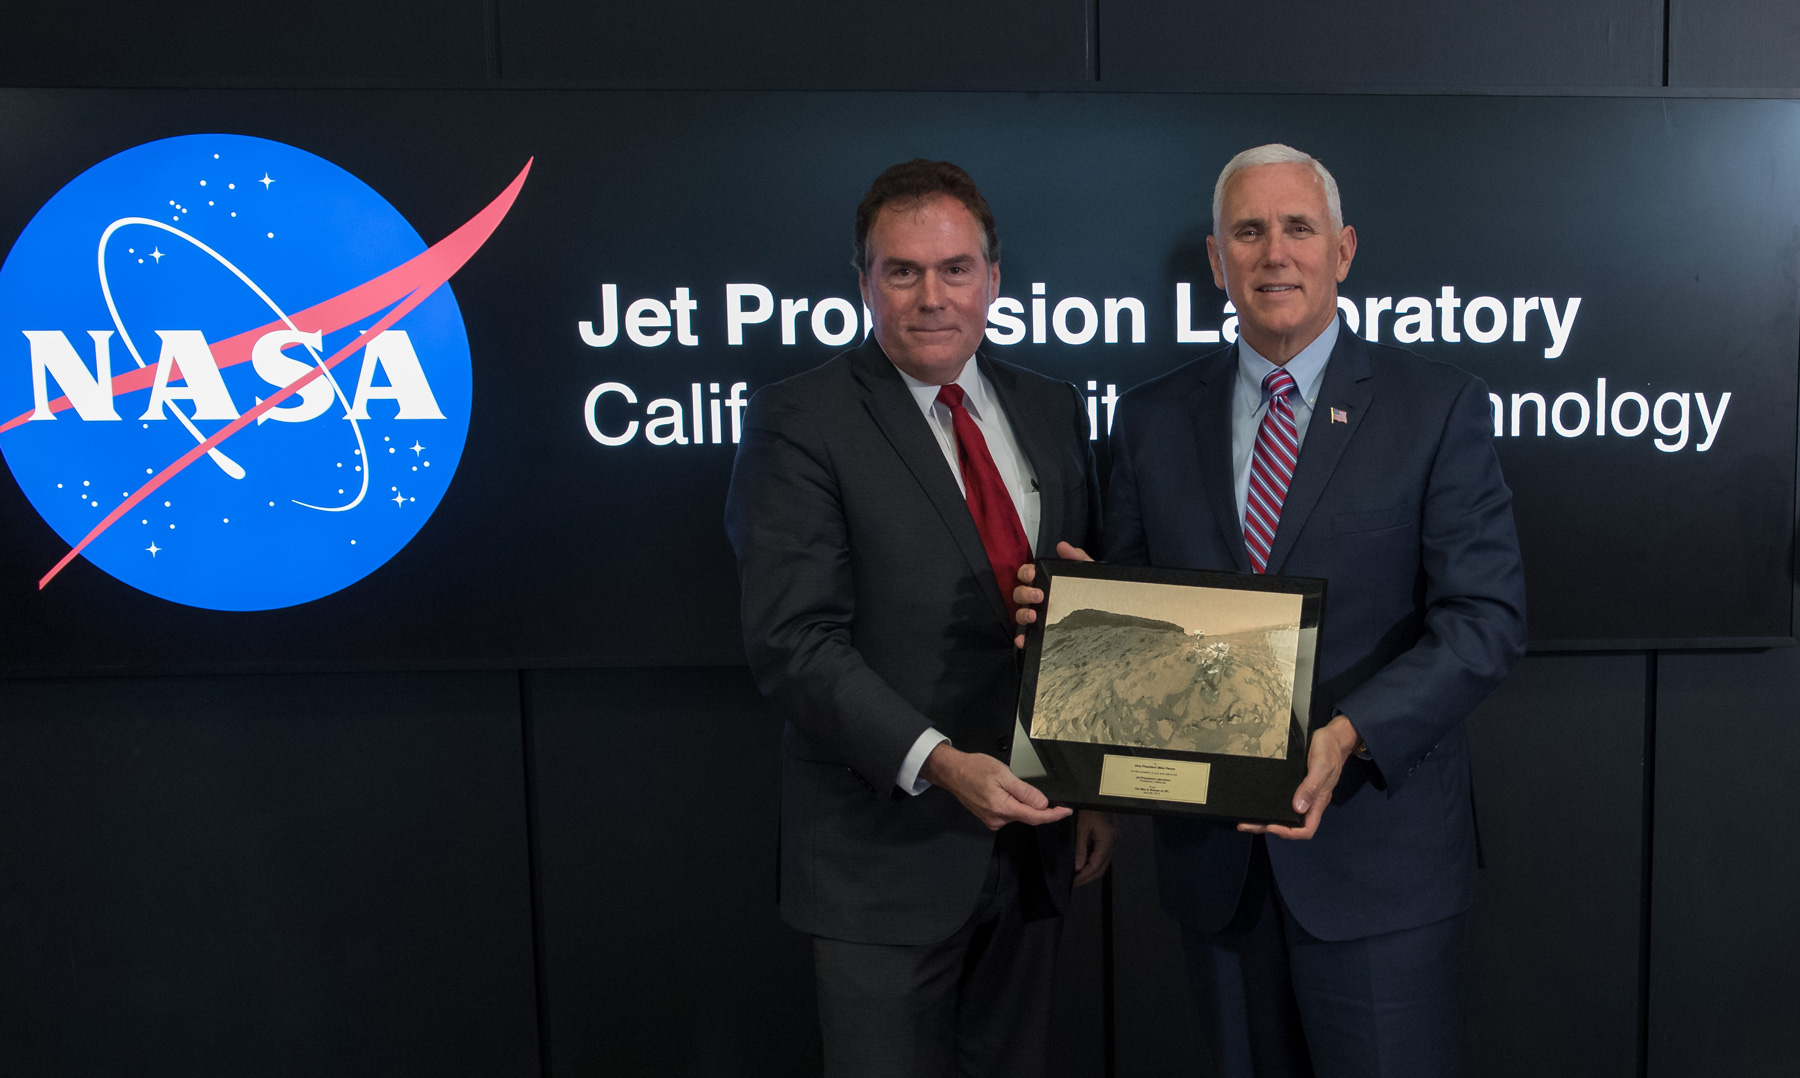 U.S. Vice President Mike Pence, right, is presented a plaque by JPL Director Michael Watkins during a tour of NASA's Jet Propulsion Laboratory, Saturday, April 28, 2018 in Pasadena, California. The plaque presents a view of the Mars Science Laboratory rover Curiosity on the surface of Mars.